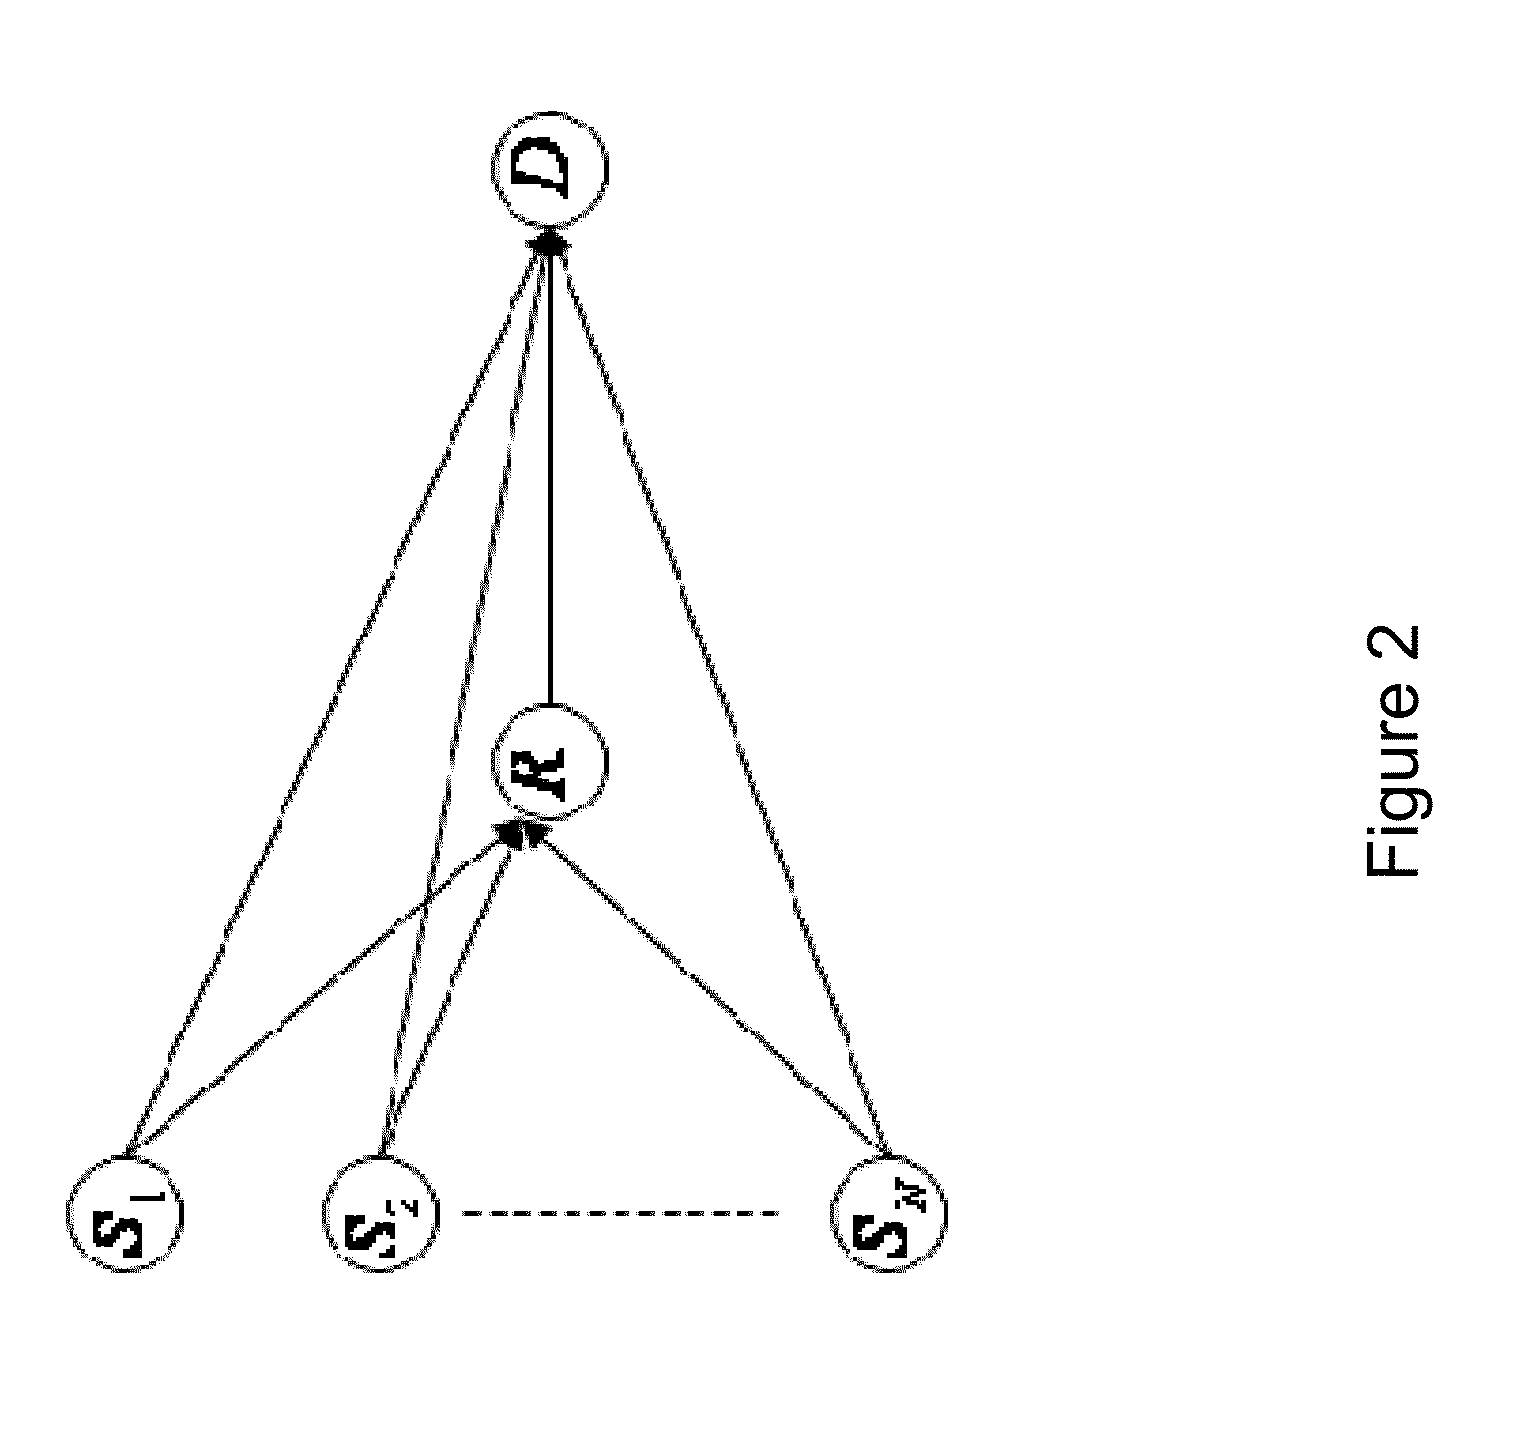 Method and a Device for Relaying in a Communications Network